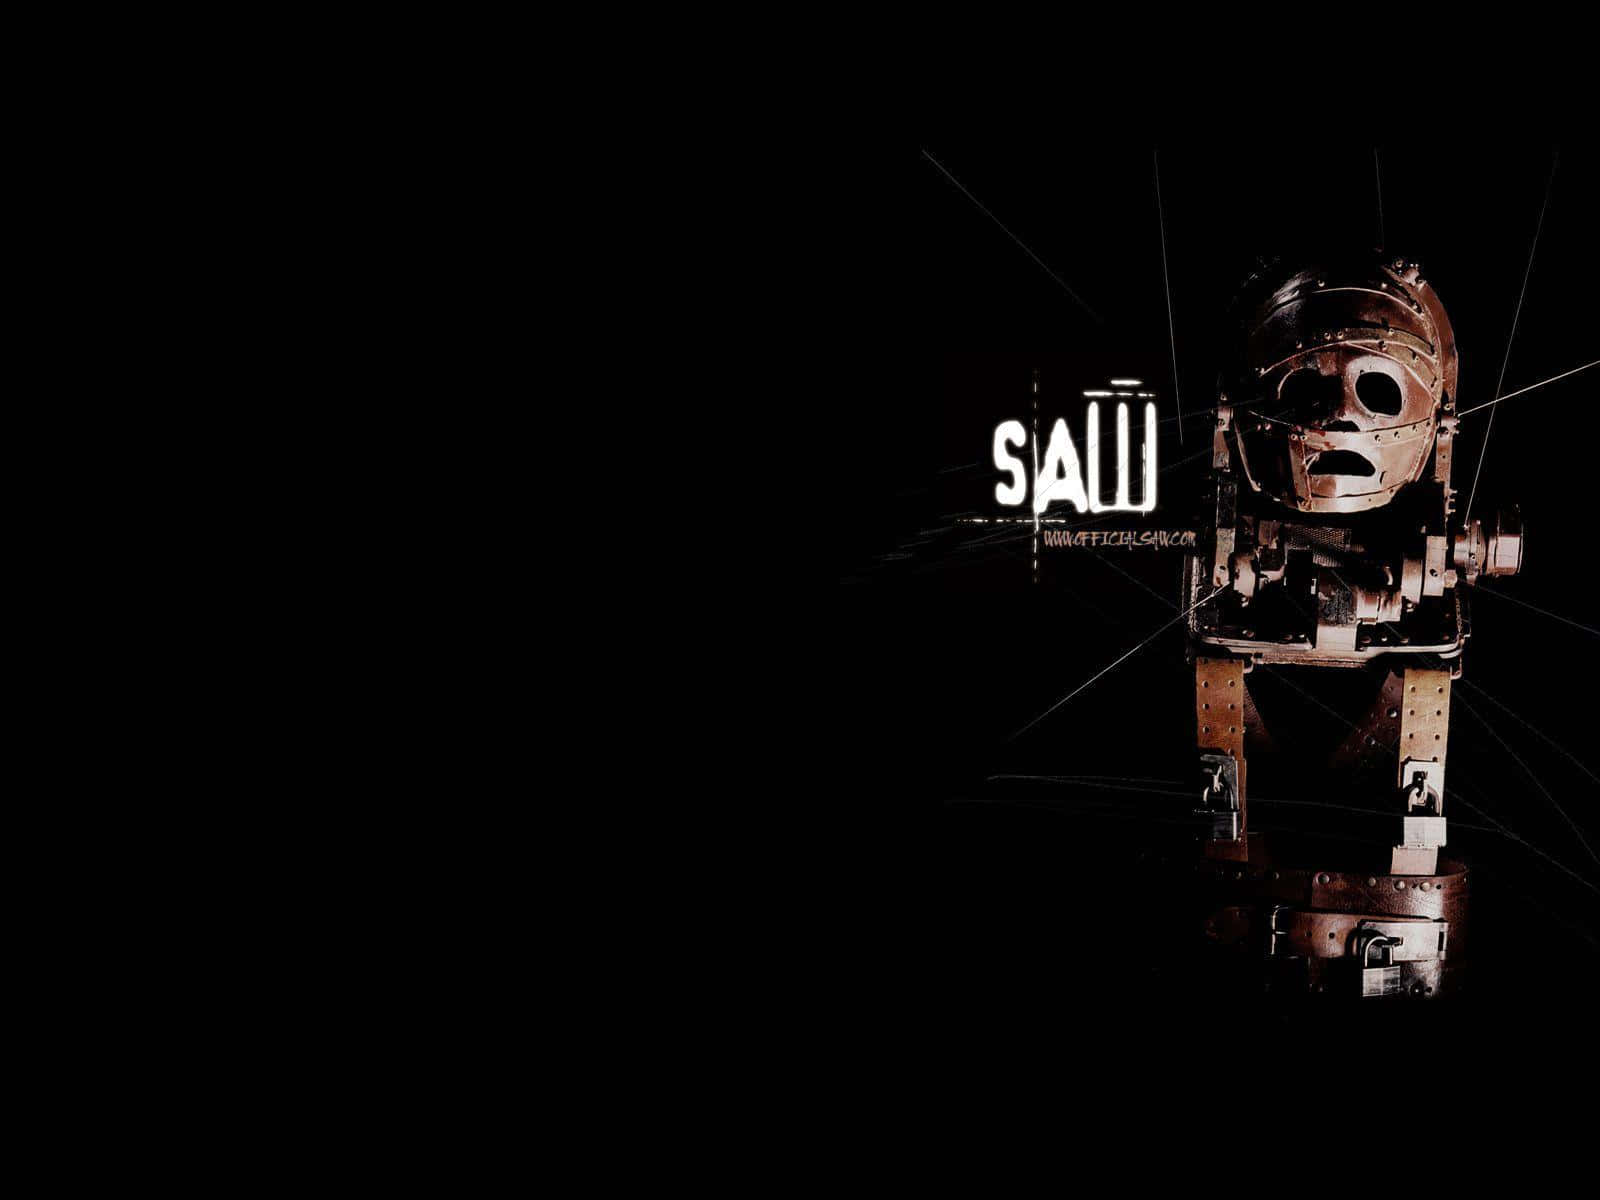 The Movie Saw Is Shown On A Black Background Wallpaper